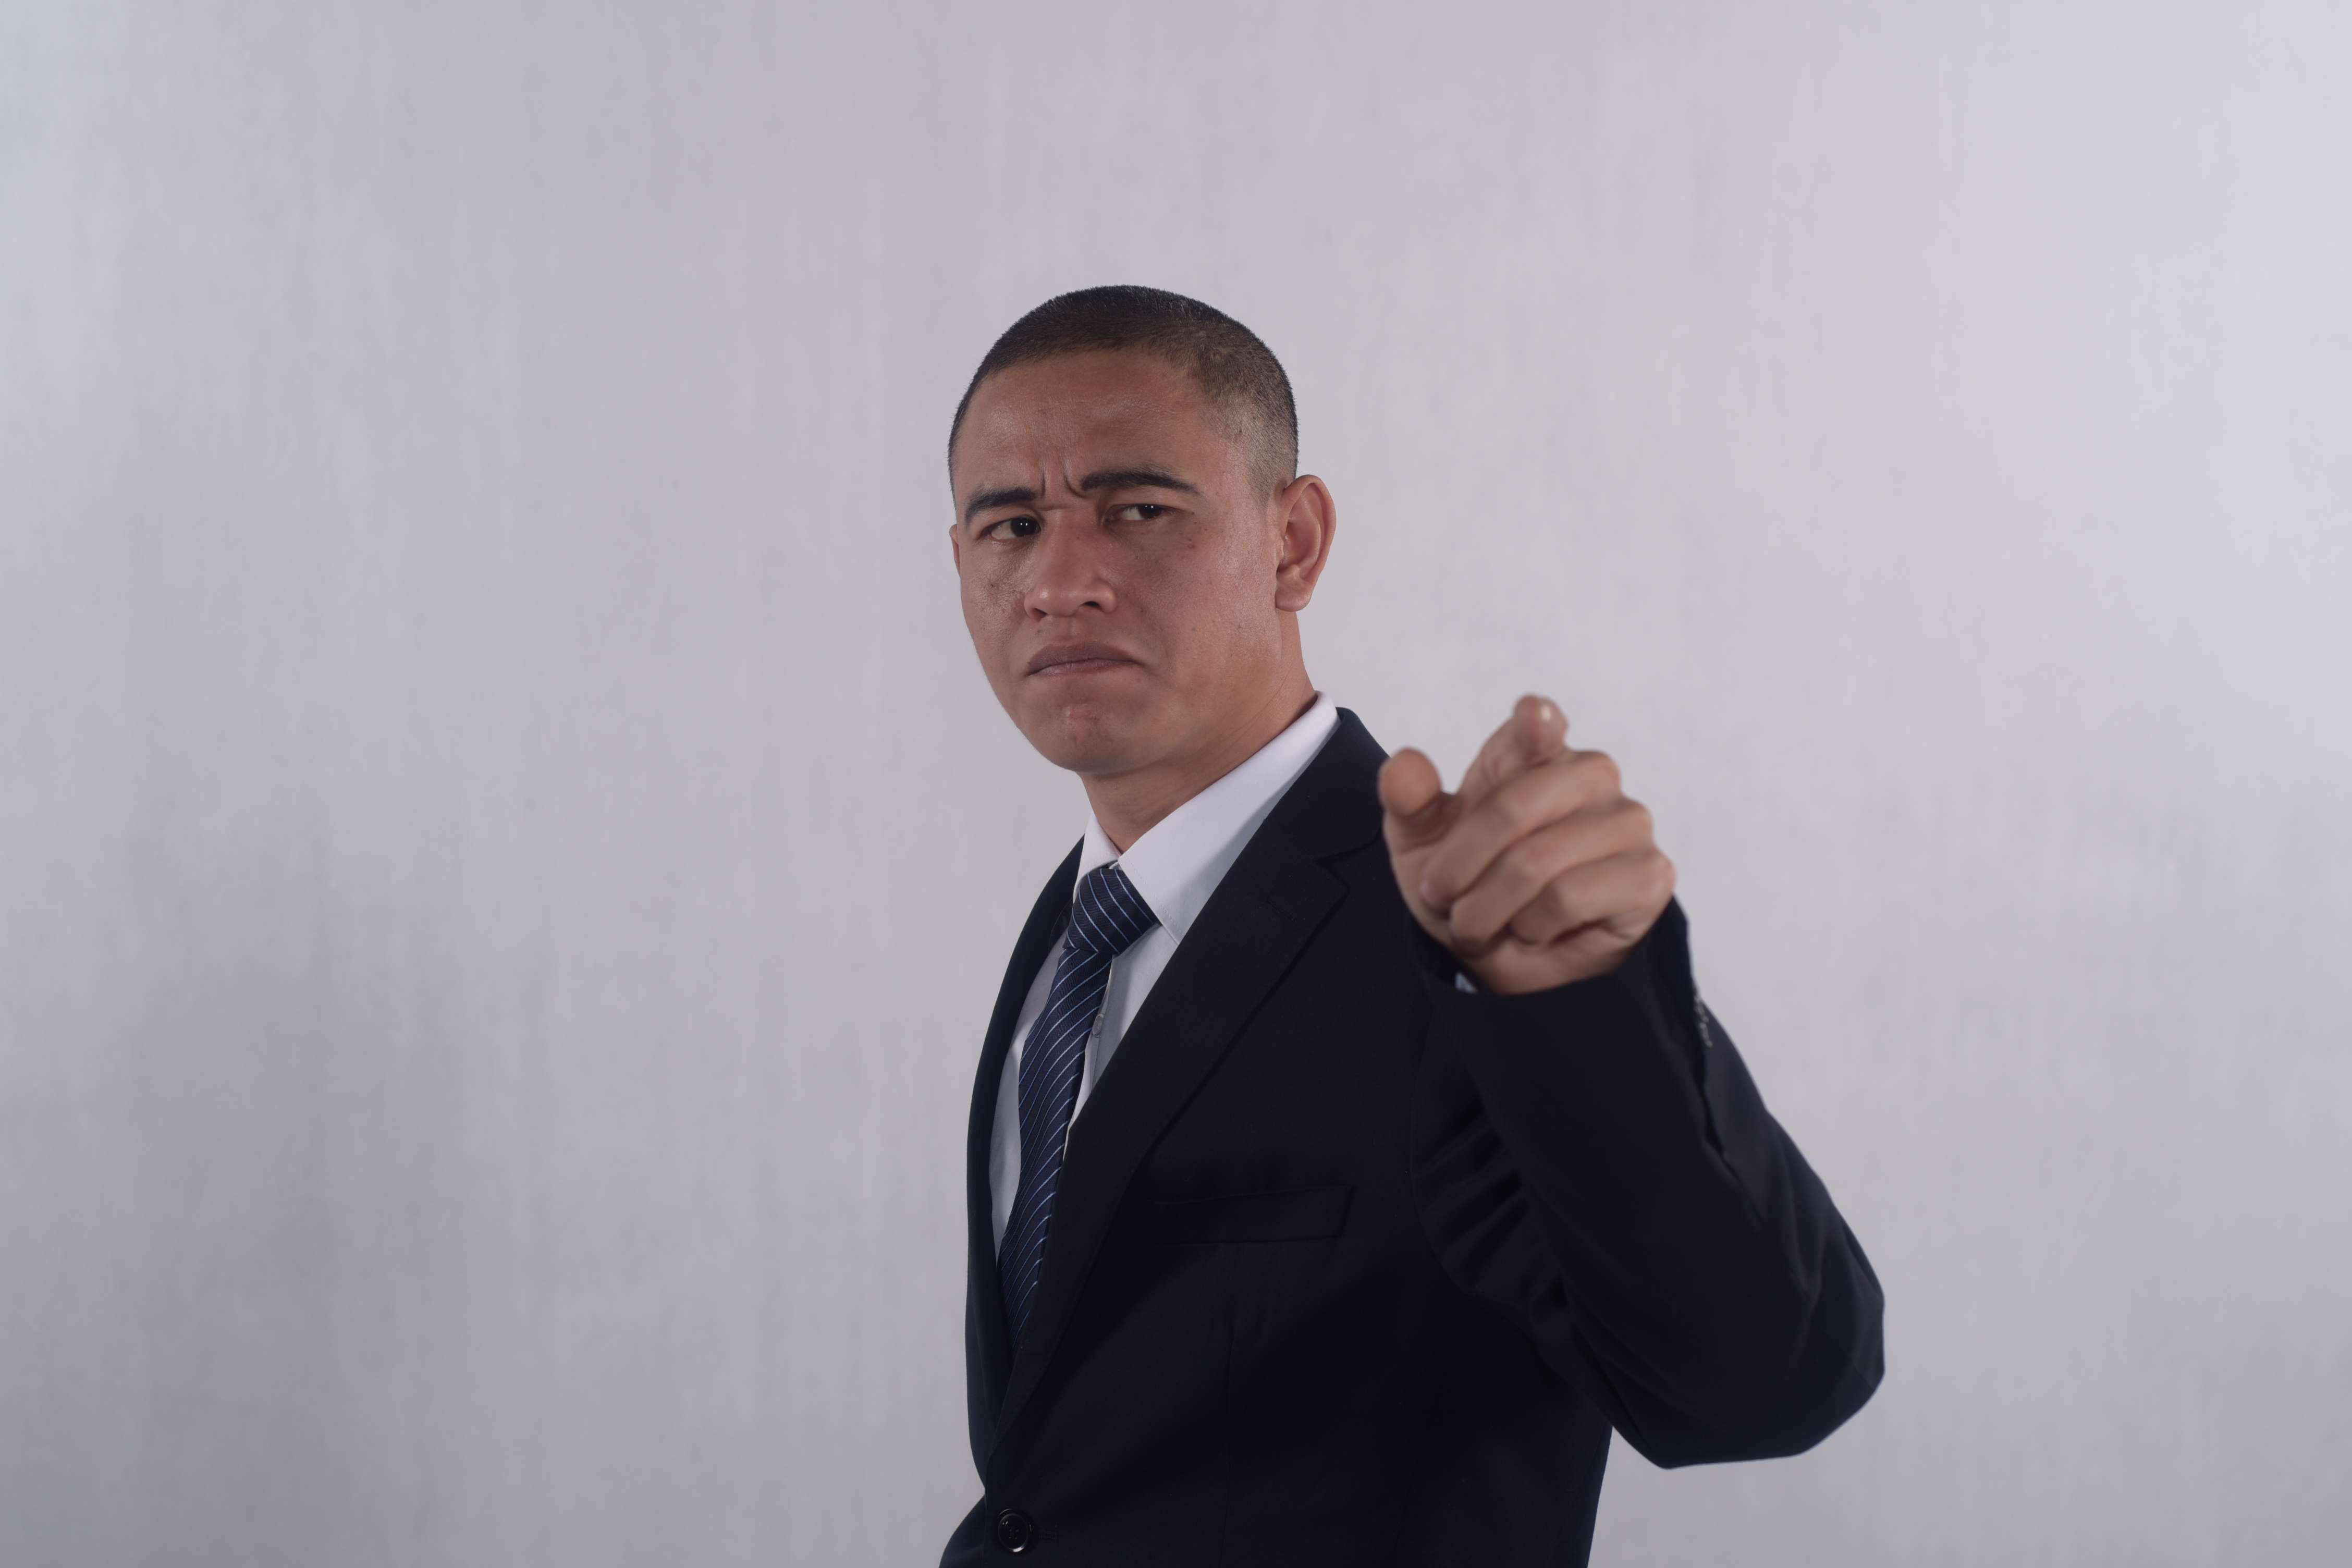 Suit Porn Hunger Games Catching Fire - Meet the Chinese Obama impersonator: can you spot the ...